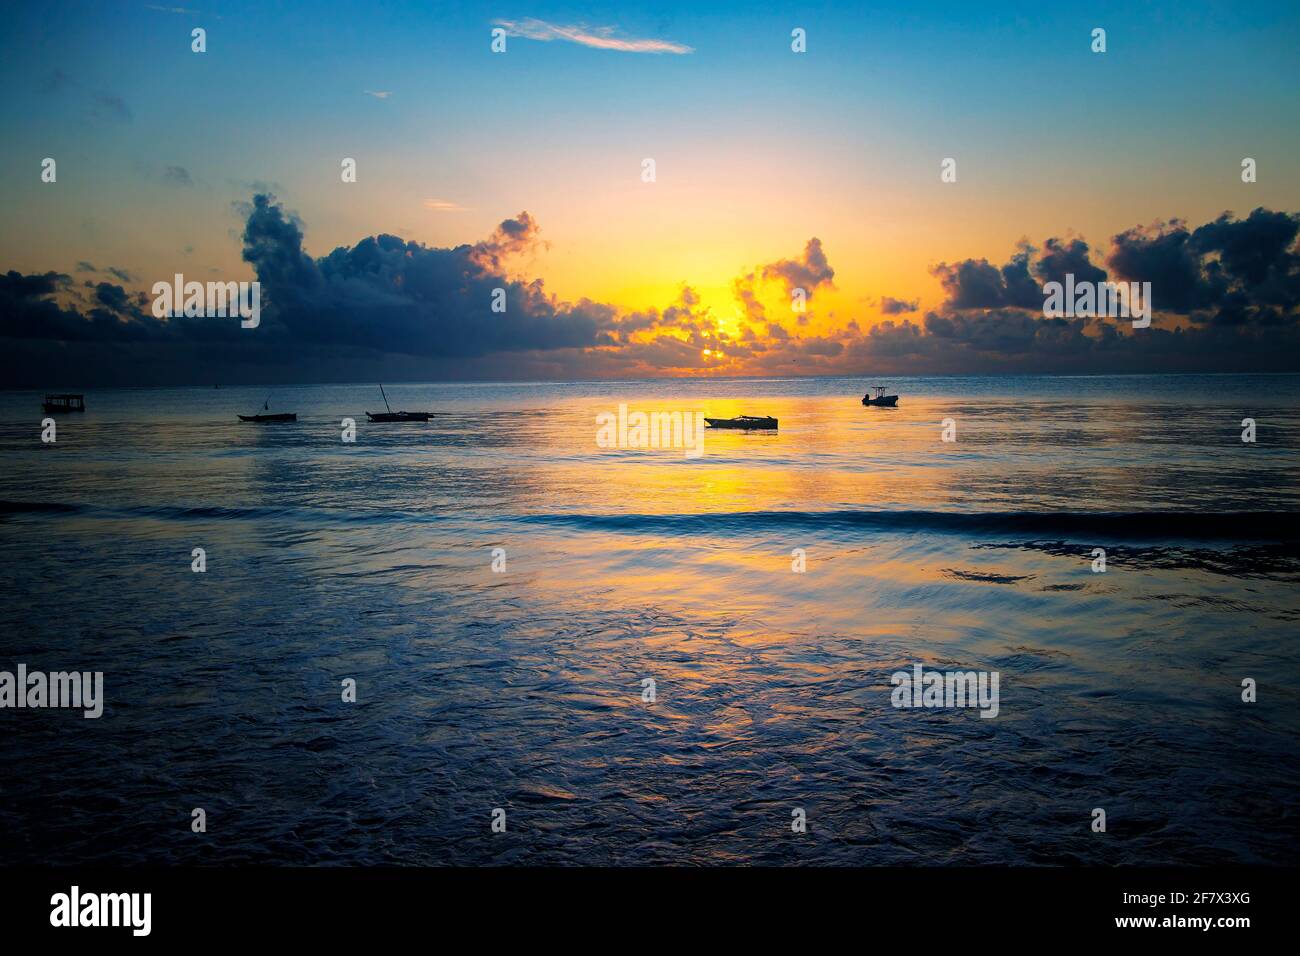 Sunrise over the sea at Diani beach near Mombasa, Kenya. There are small wooden boats on the water, Africa. Stock Photo